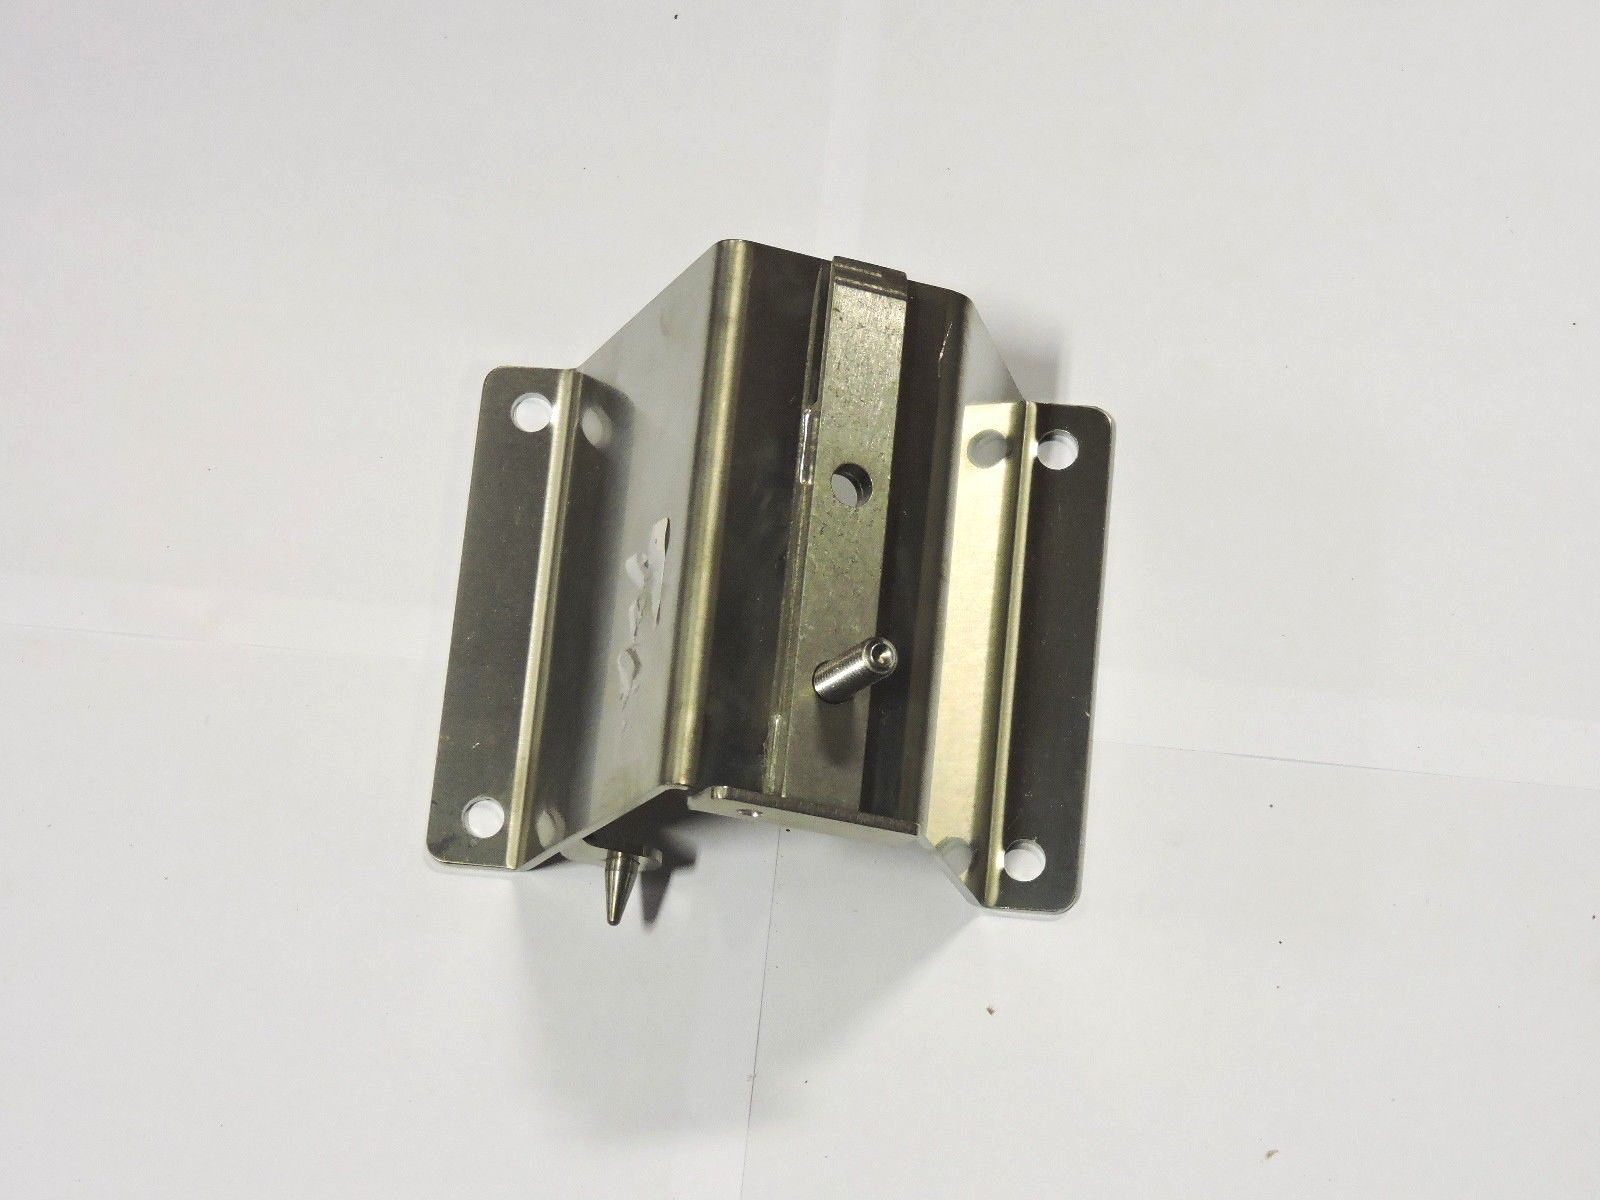 Product Table Bracket - Berkel OEM Part # 3475-0130 - Available from City Food Equipment